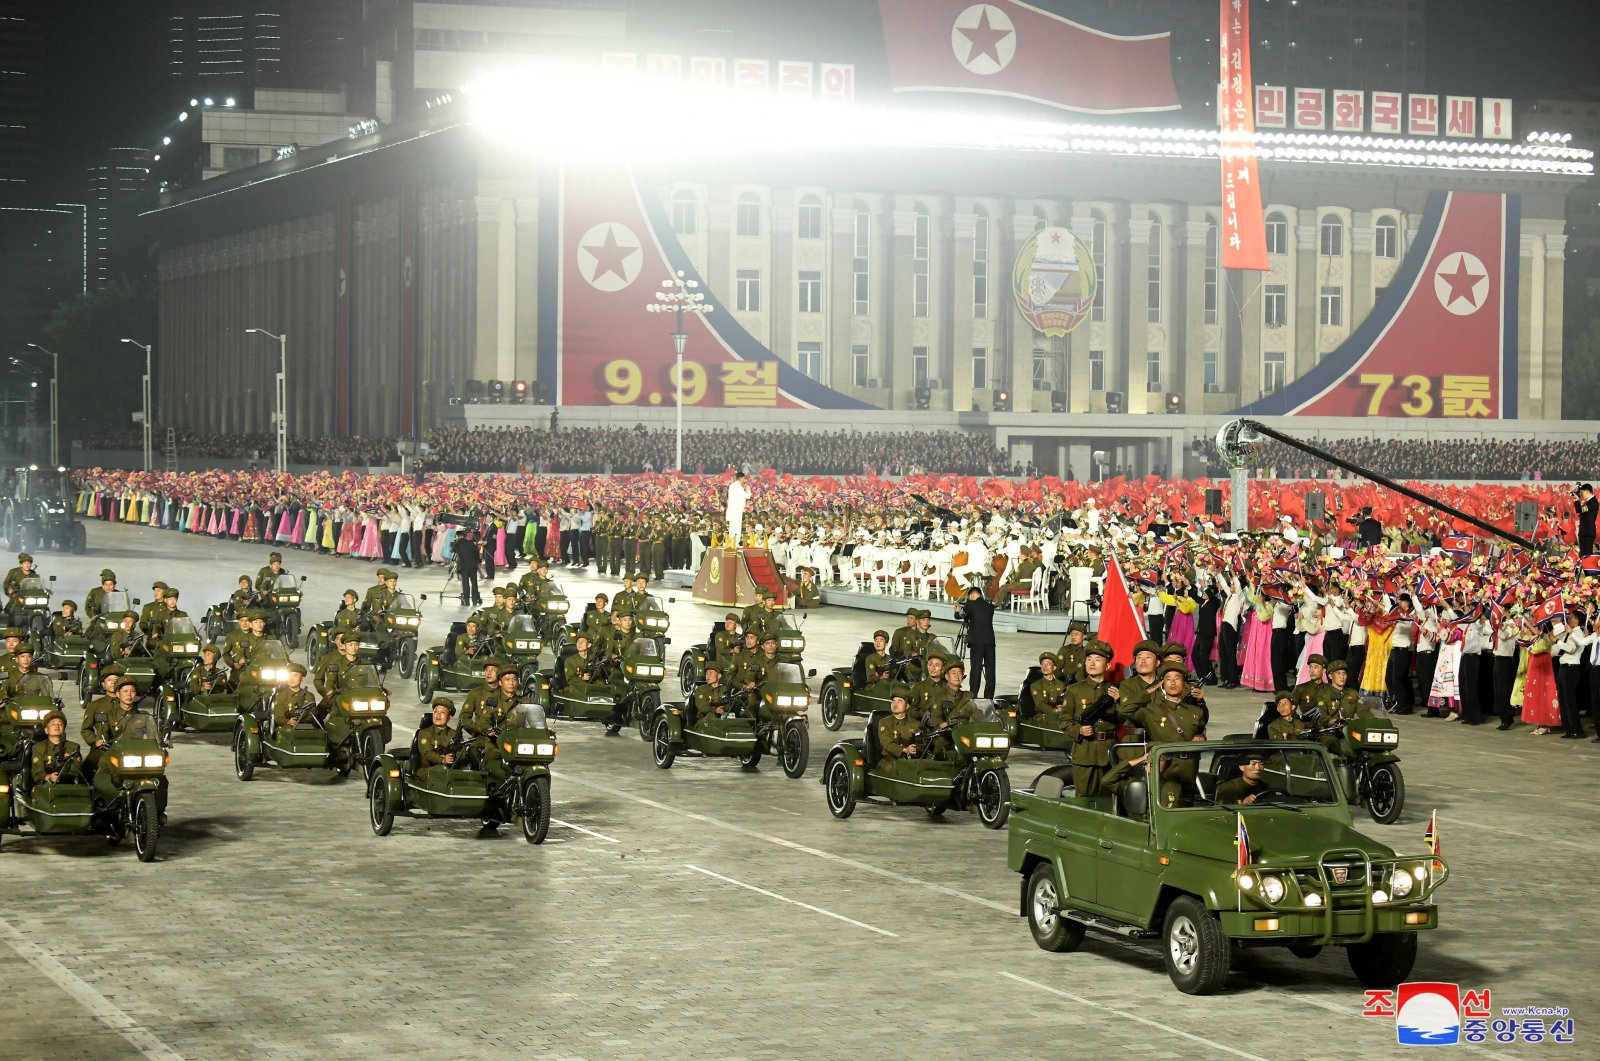 A photo released by the official North Korean Central News Agency (KCNA) shows a moment from the military parade at Kim Il Sung Square in Pyongyang, North Korea, Sept. 9, 2021. (EPA Photo)